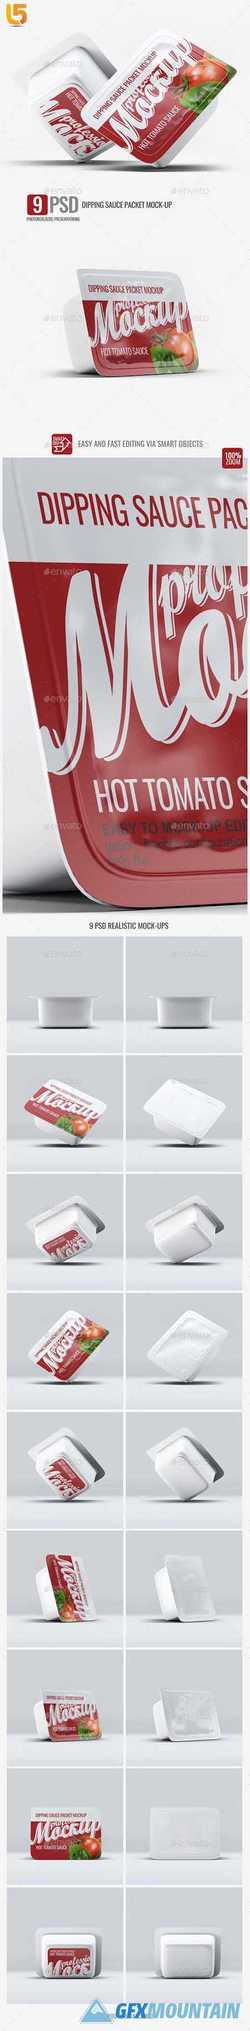 Dipping Sauce Packet Mock-Up 23293651